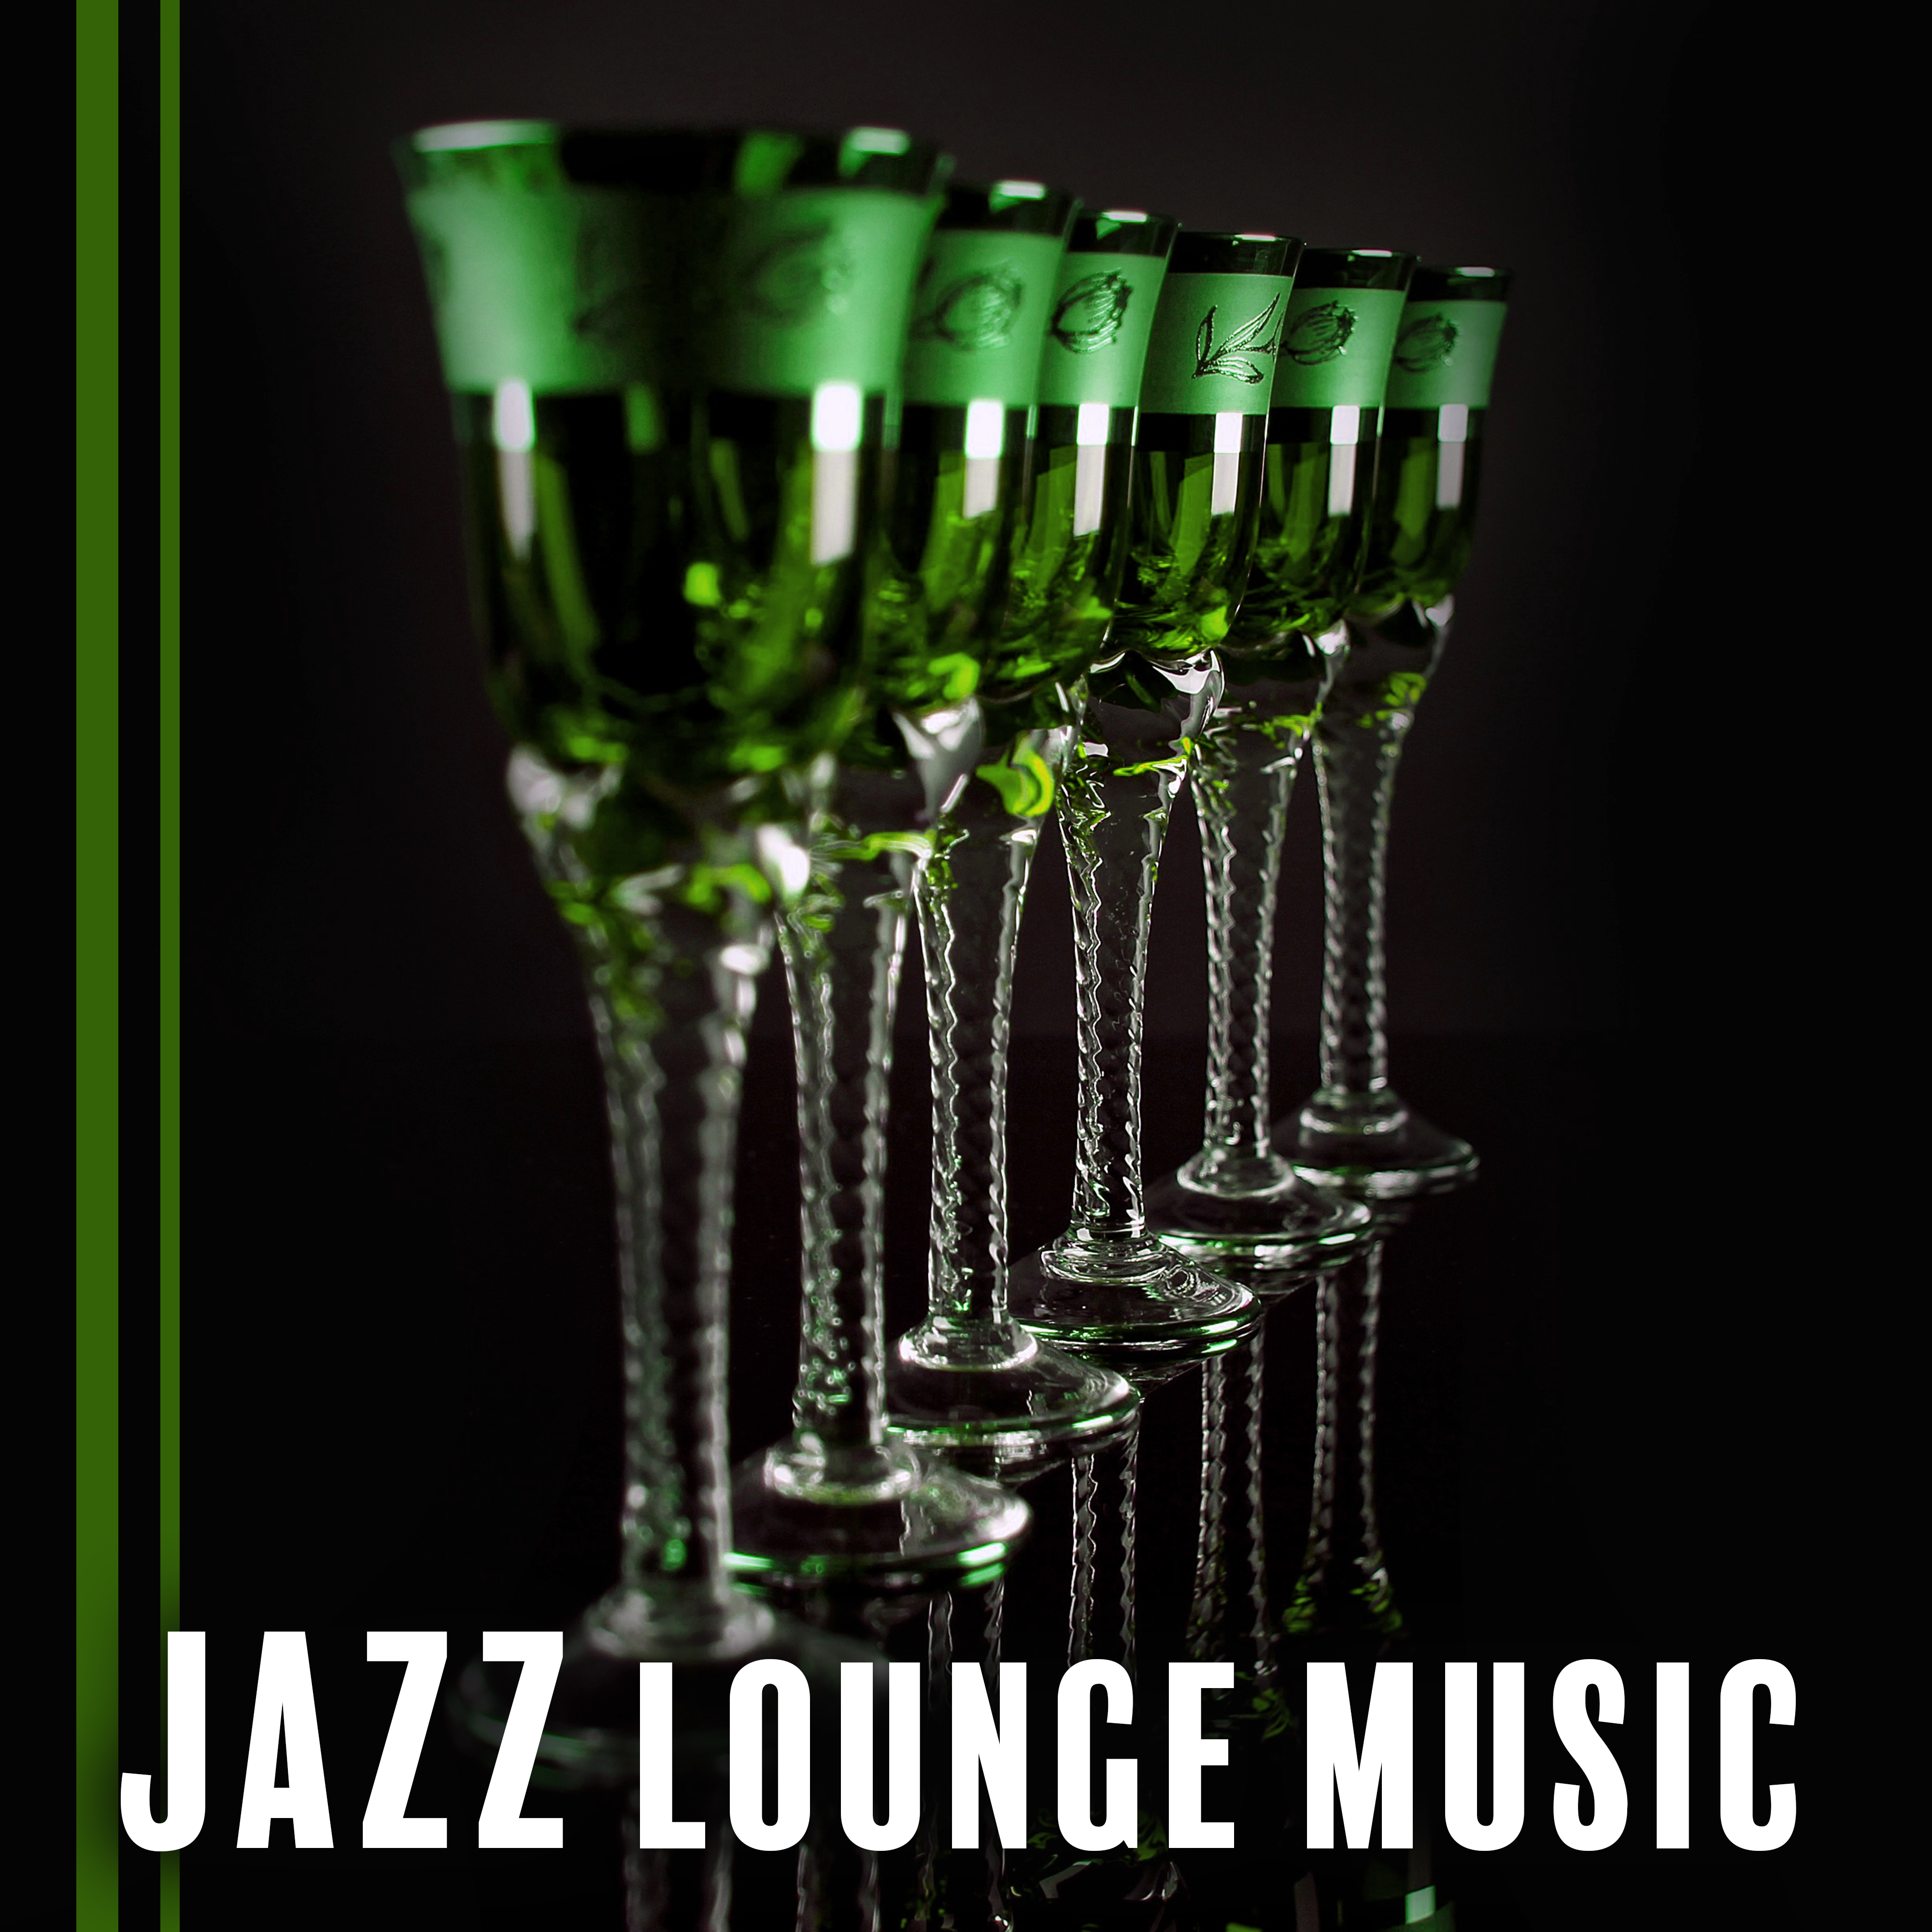 Jazz Lounge Music  Smooth Sounds to Relax, Easy Listening, Instrumental Jazz, Piano Bar